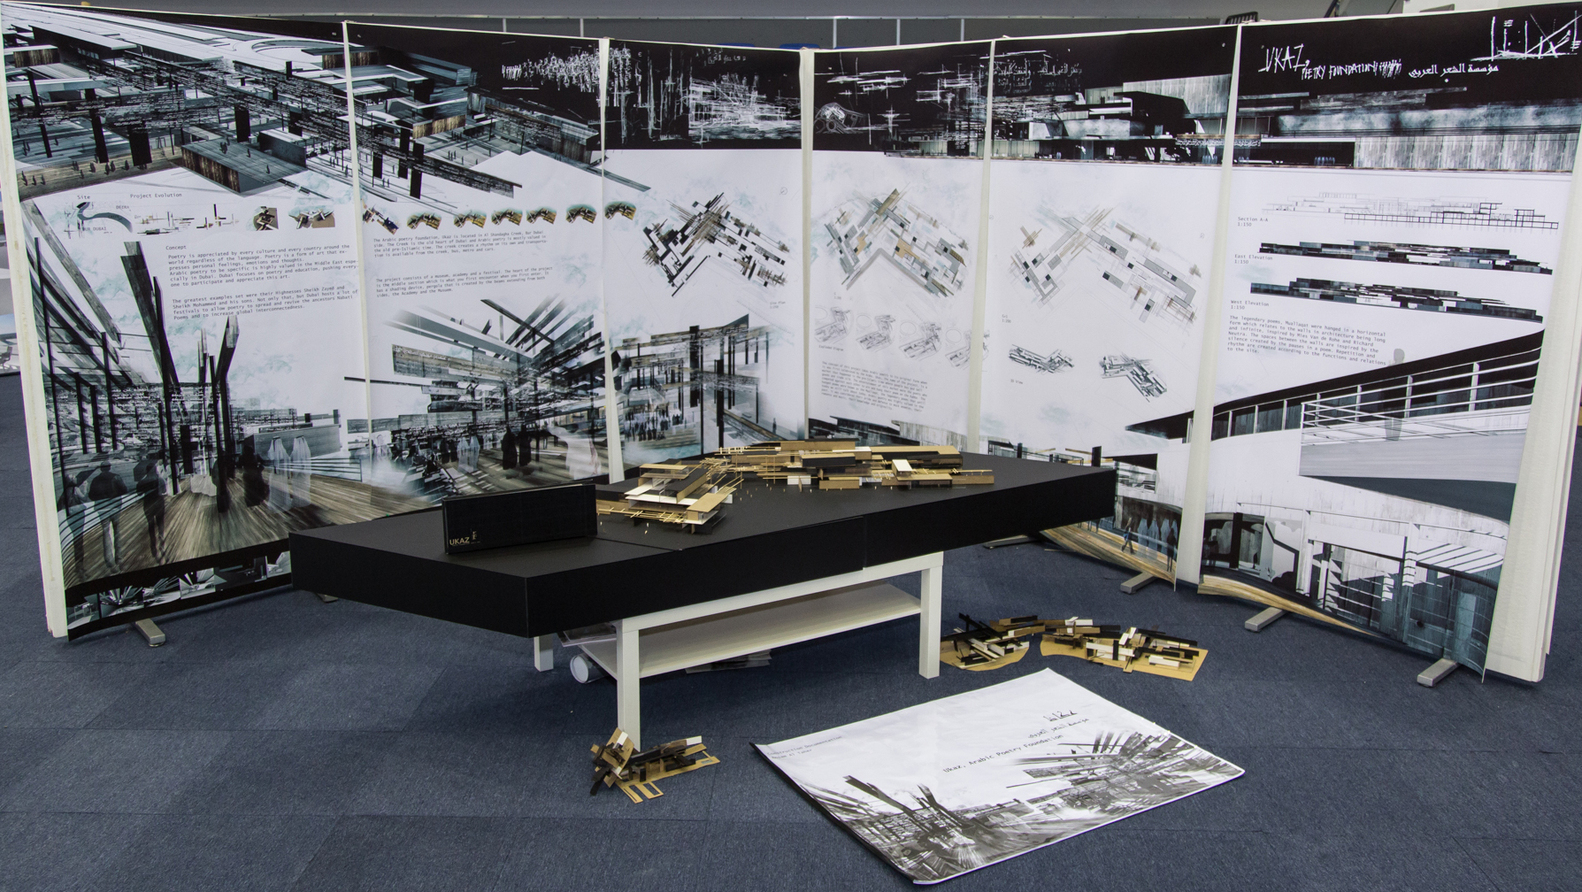 The American University in Dubai Celebrates the Work of Students at the Yearly Architecture Senior Showcase